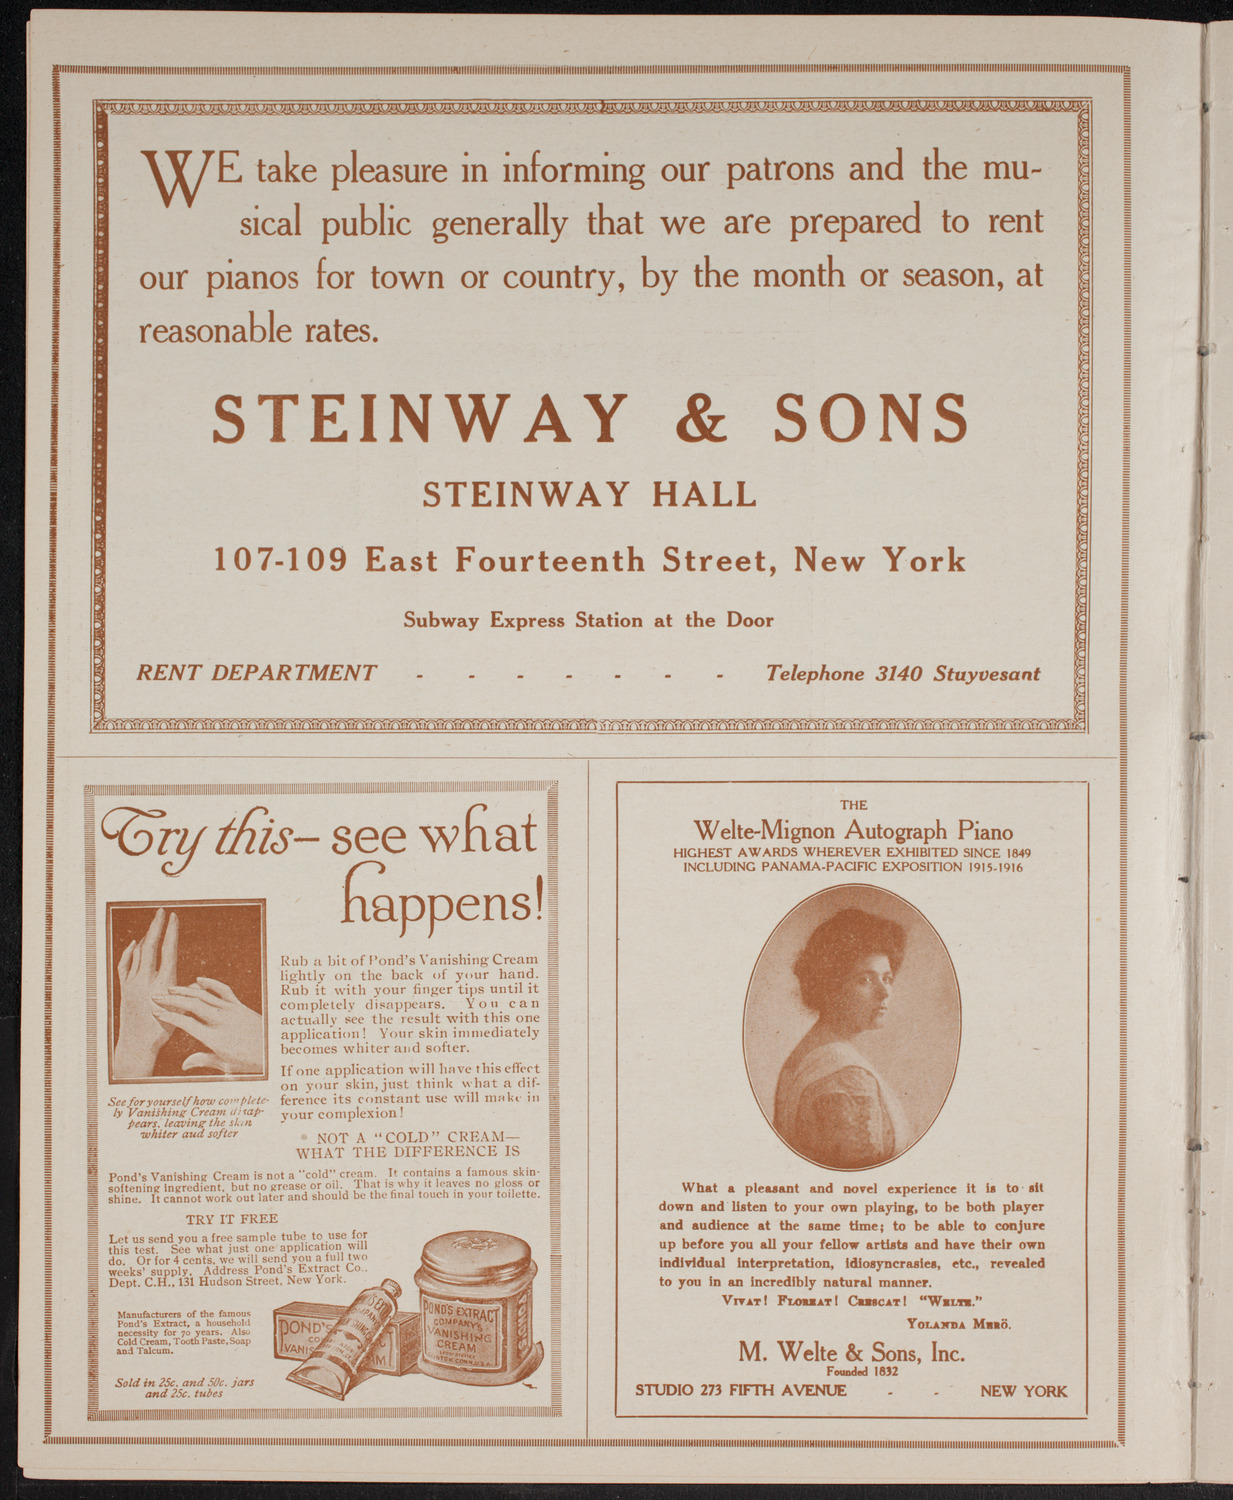 Graduation: College of Dental and Oral Surgery of New York, June 6, 1916, program page 4